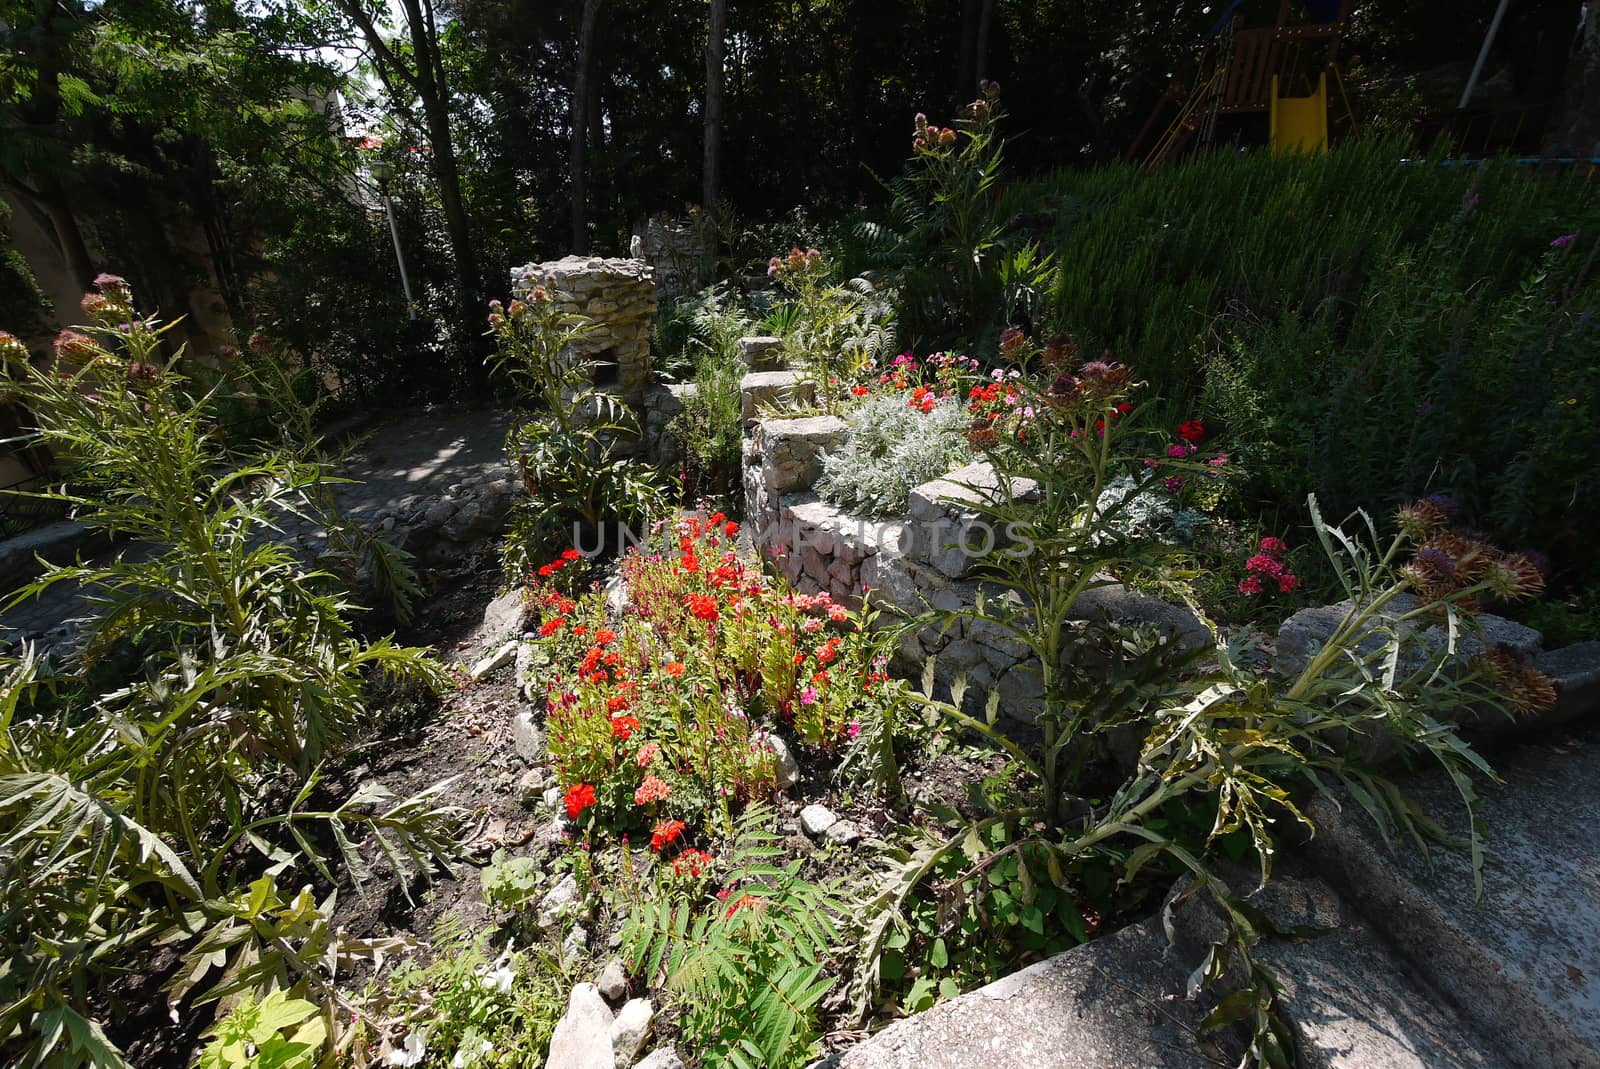 Decorative flowerbed laid out of stones with growing flowers between them located in the shade of trees